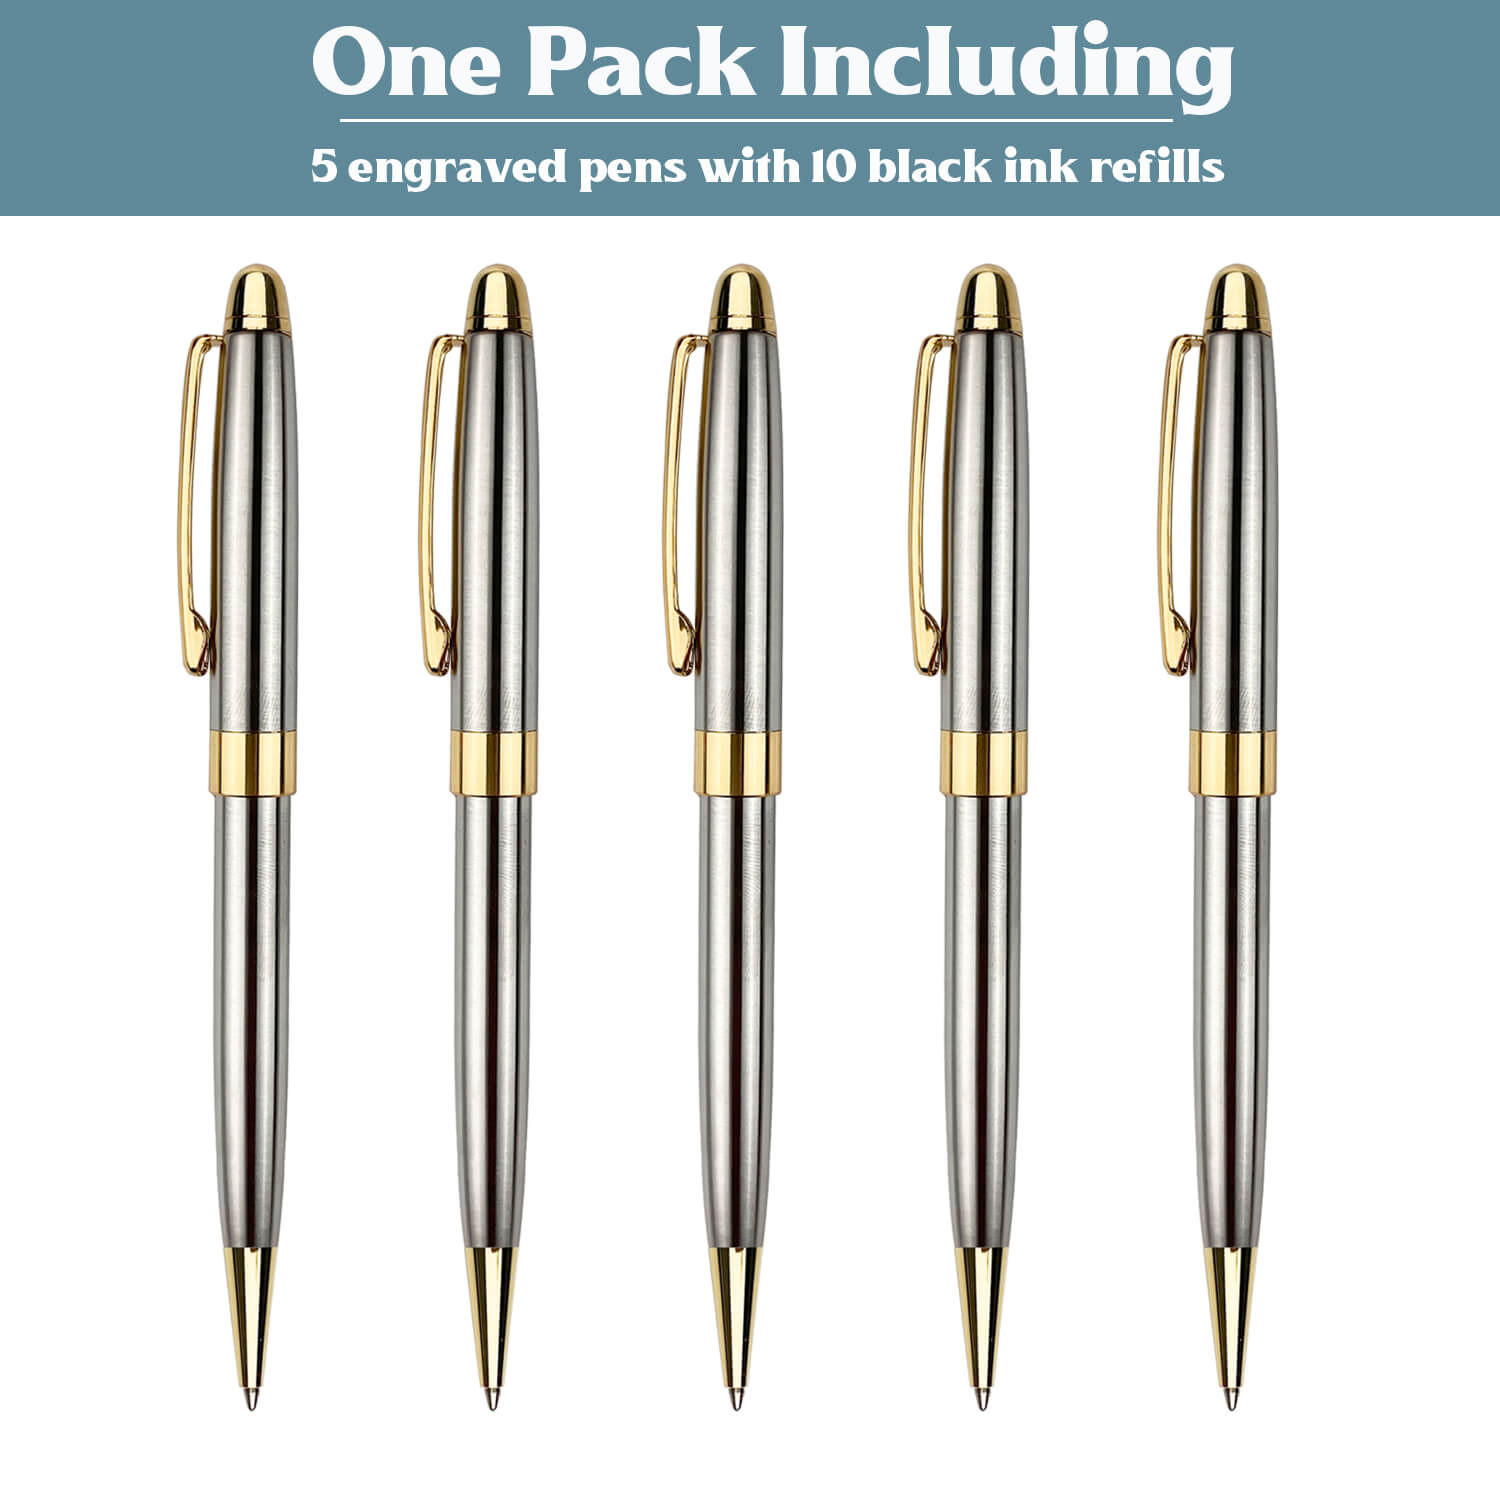 Set of 4 Cross Pens Includes Two Gold Pens, One Silver Pen and One Refill